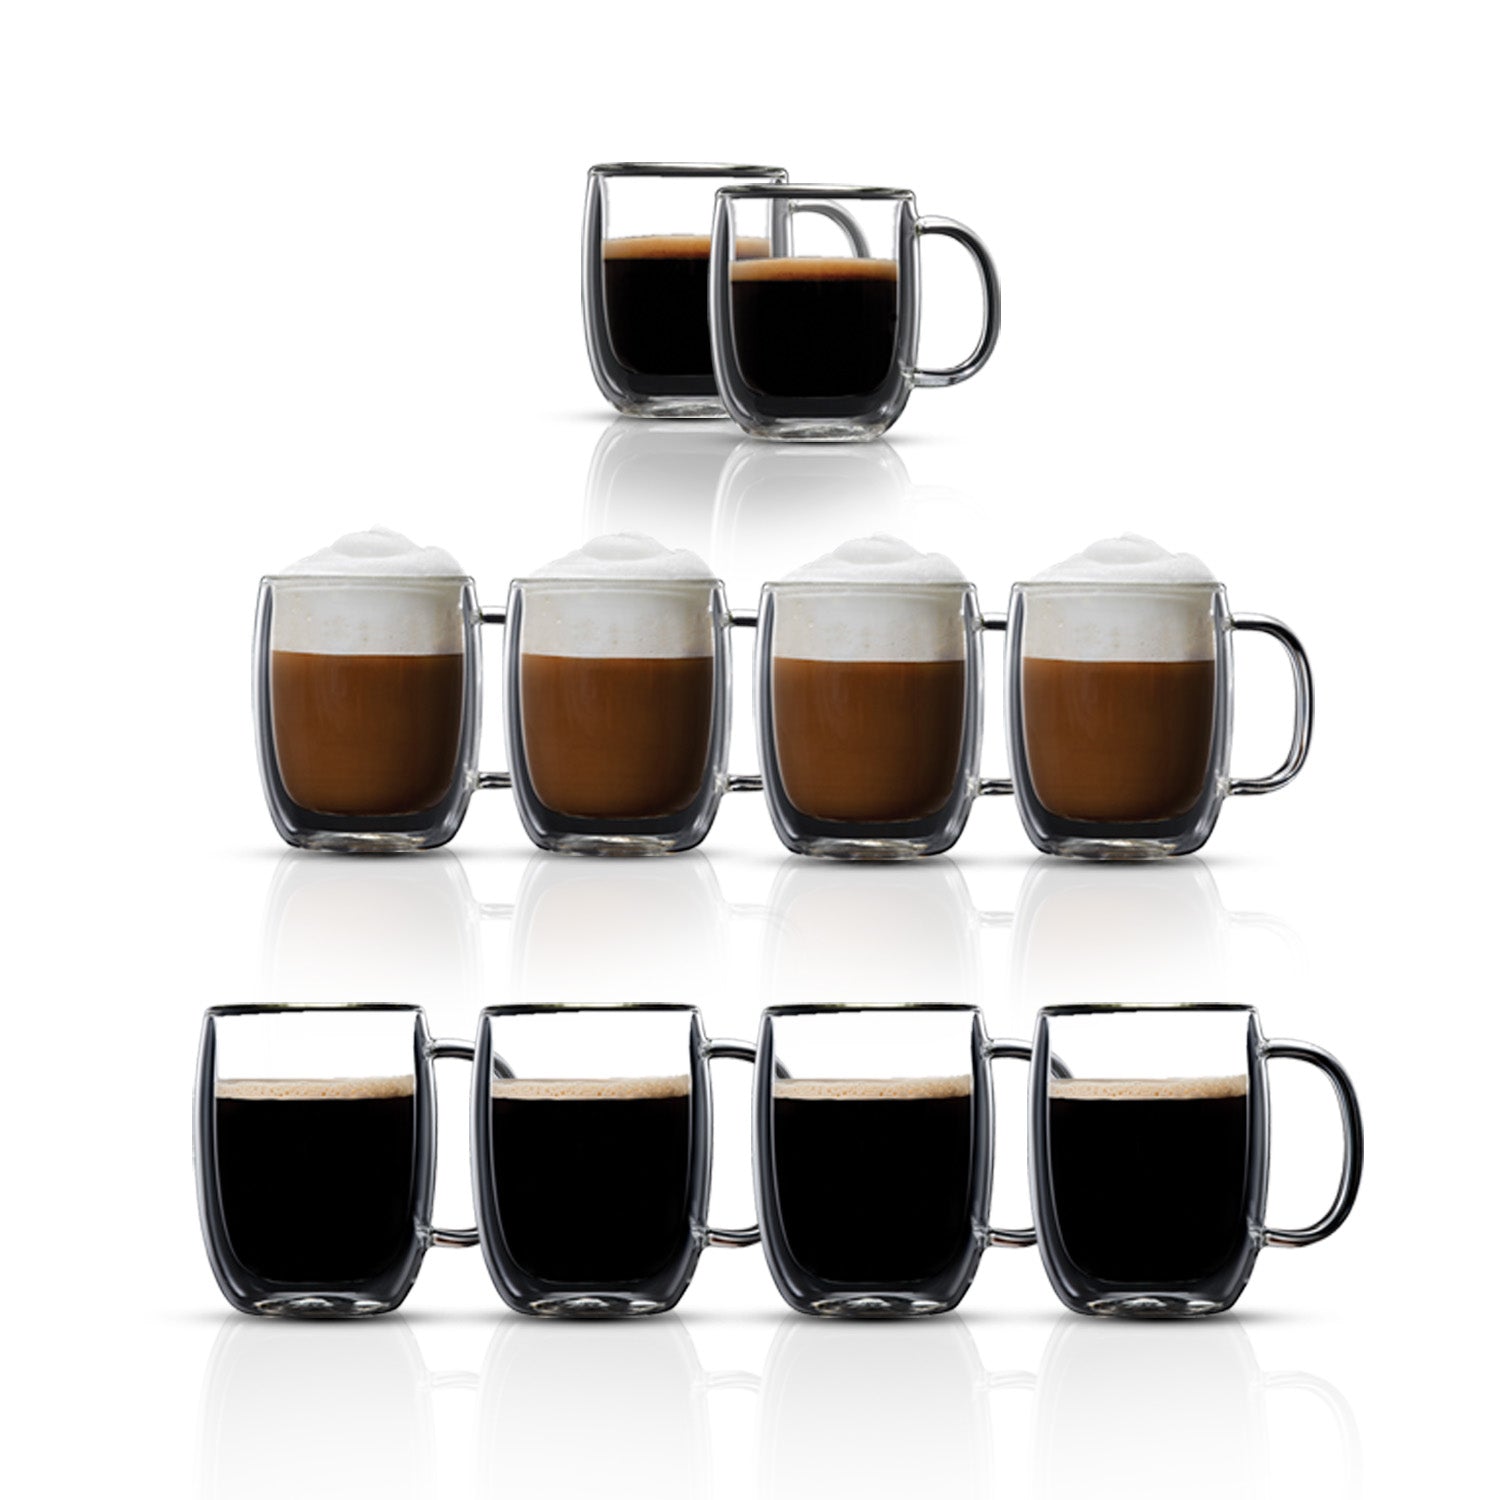 10Pcs Exclusive Coffee Combo Set Double Wall Mugs for Espresso, Cappuccino, Americano. Hot Or Cold Drink Beverages. Insulated Glass Cups Lighweight